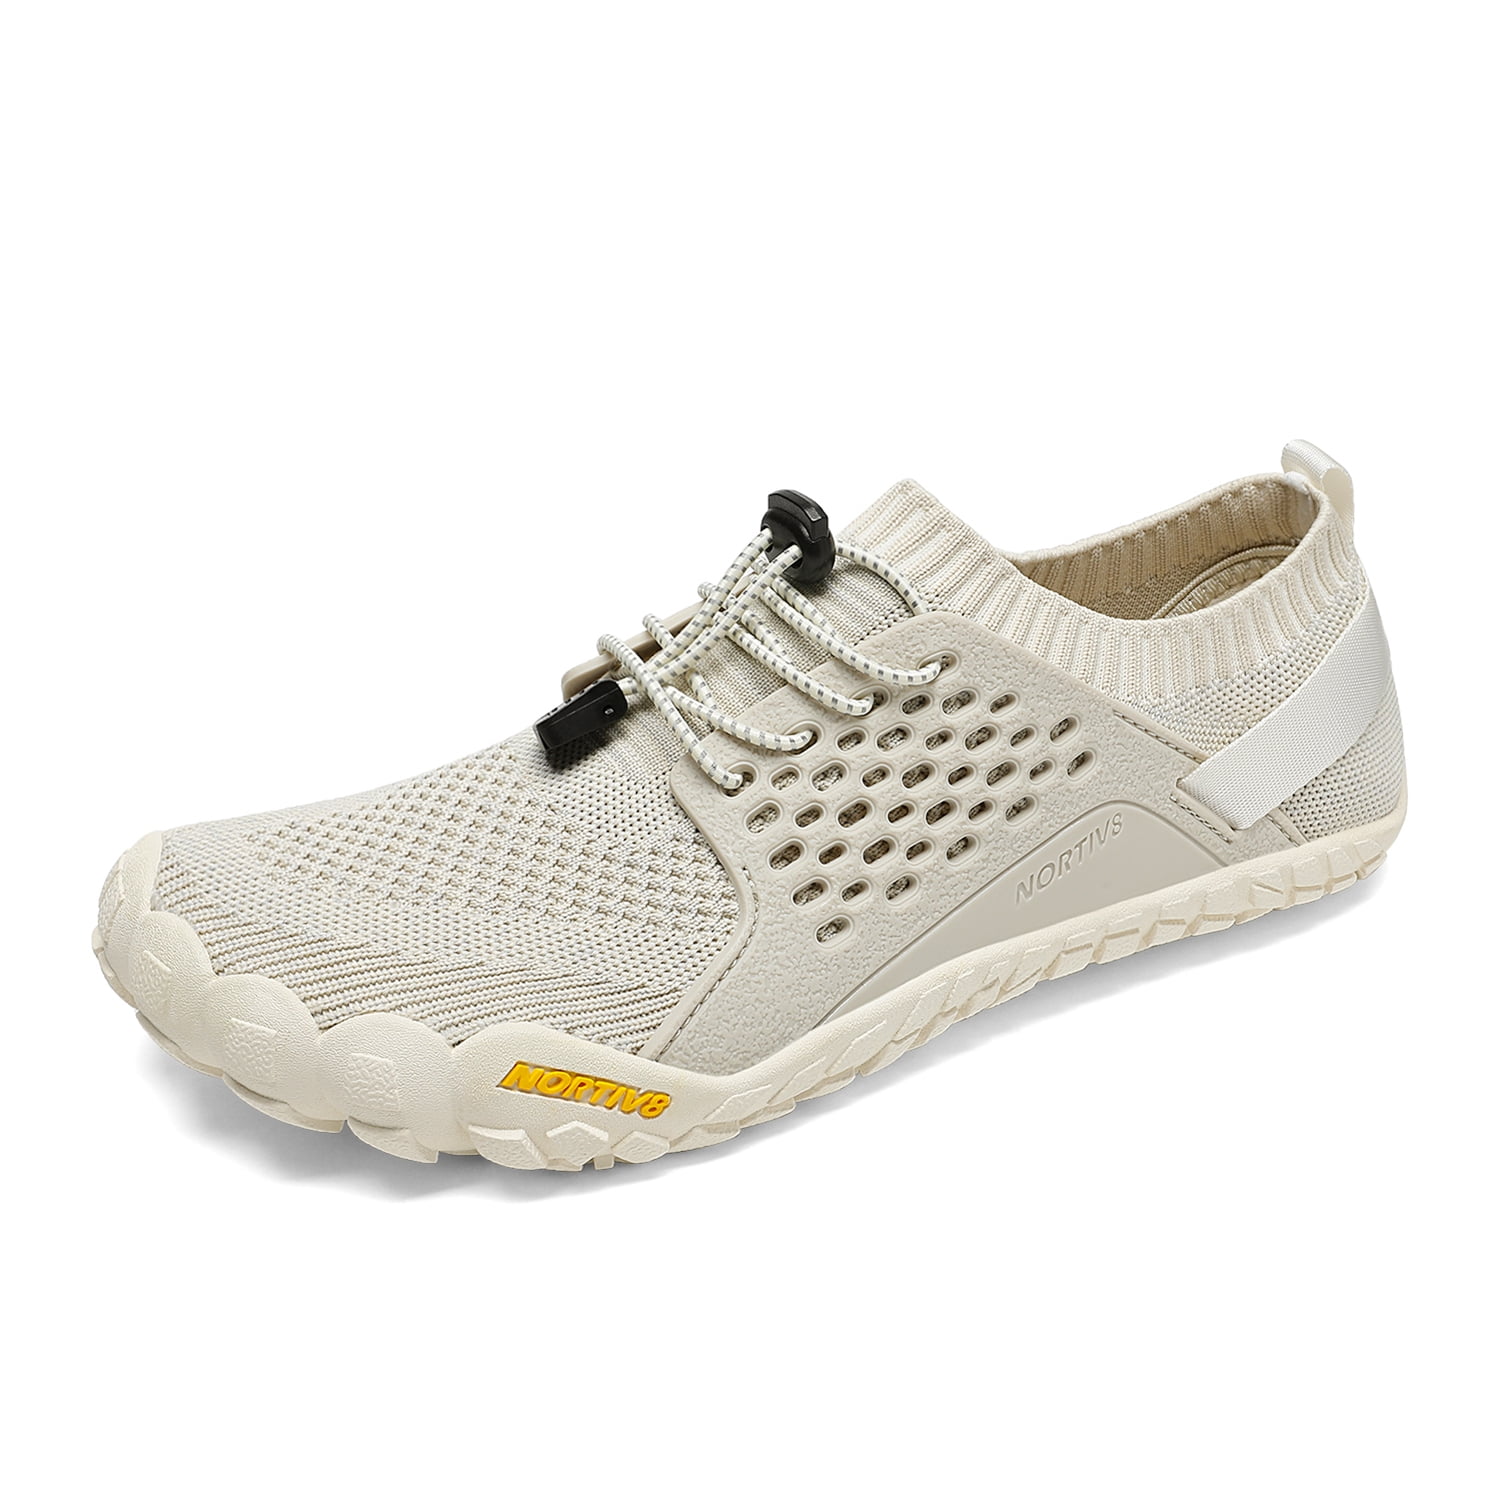 Womens Water Shoes Beach Quick Drying Sneakers Casual Sports Shoes Pool Exercise 